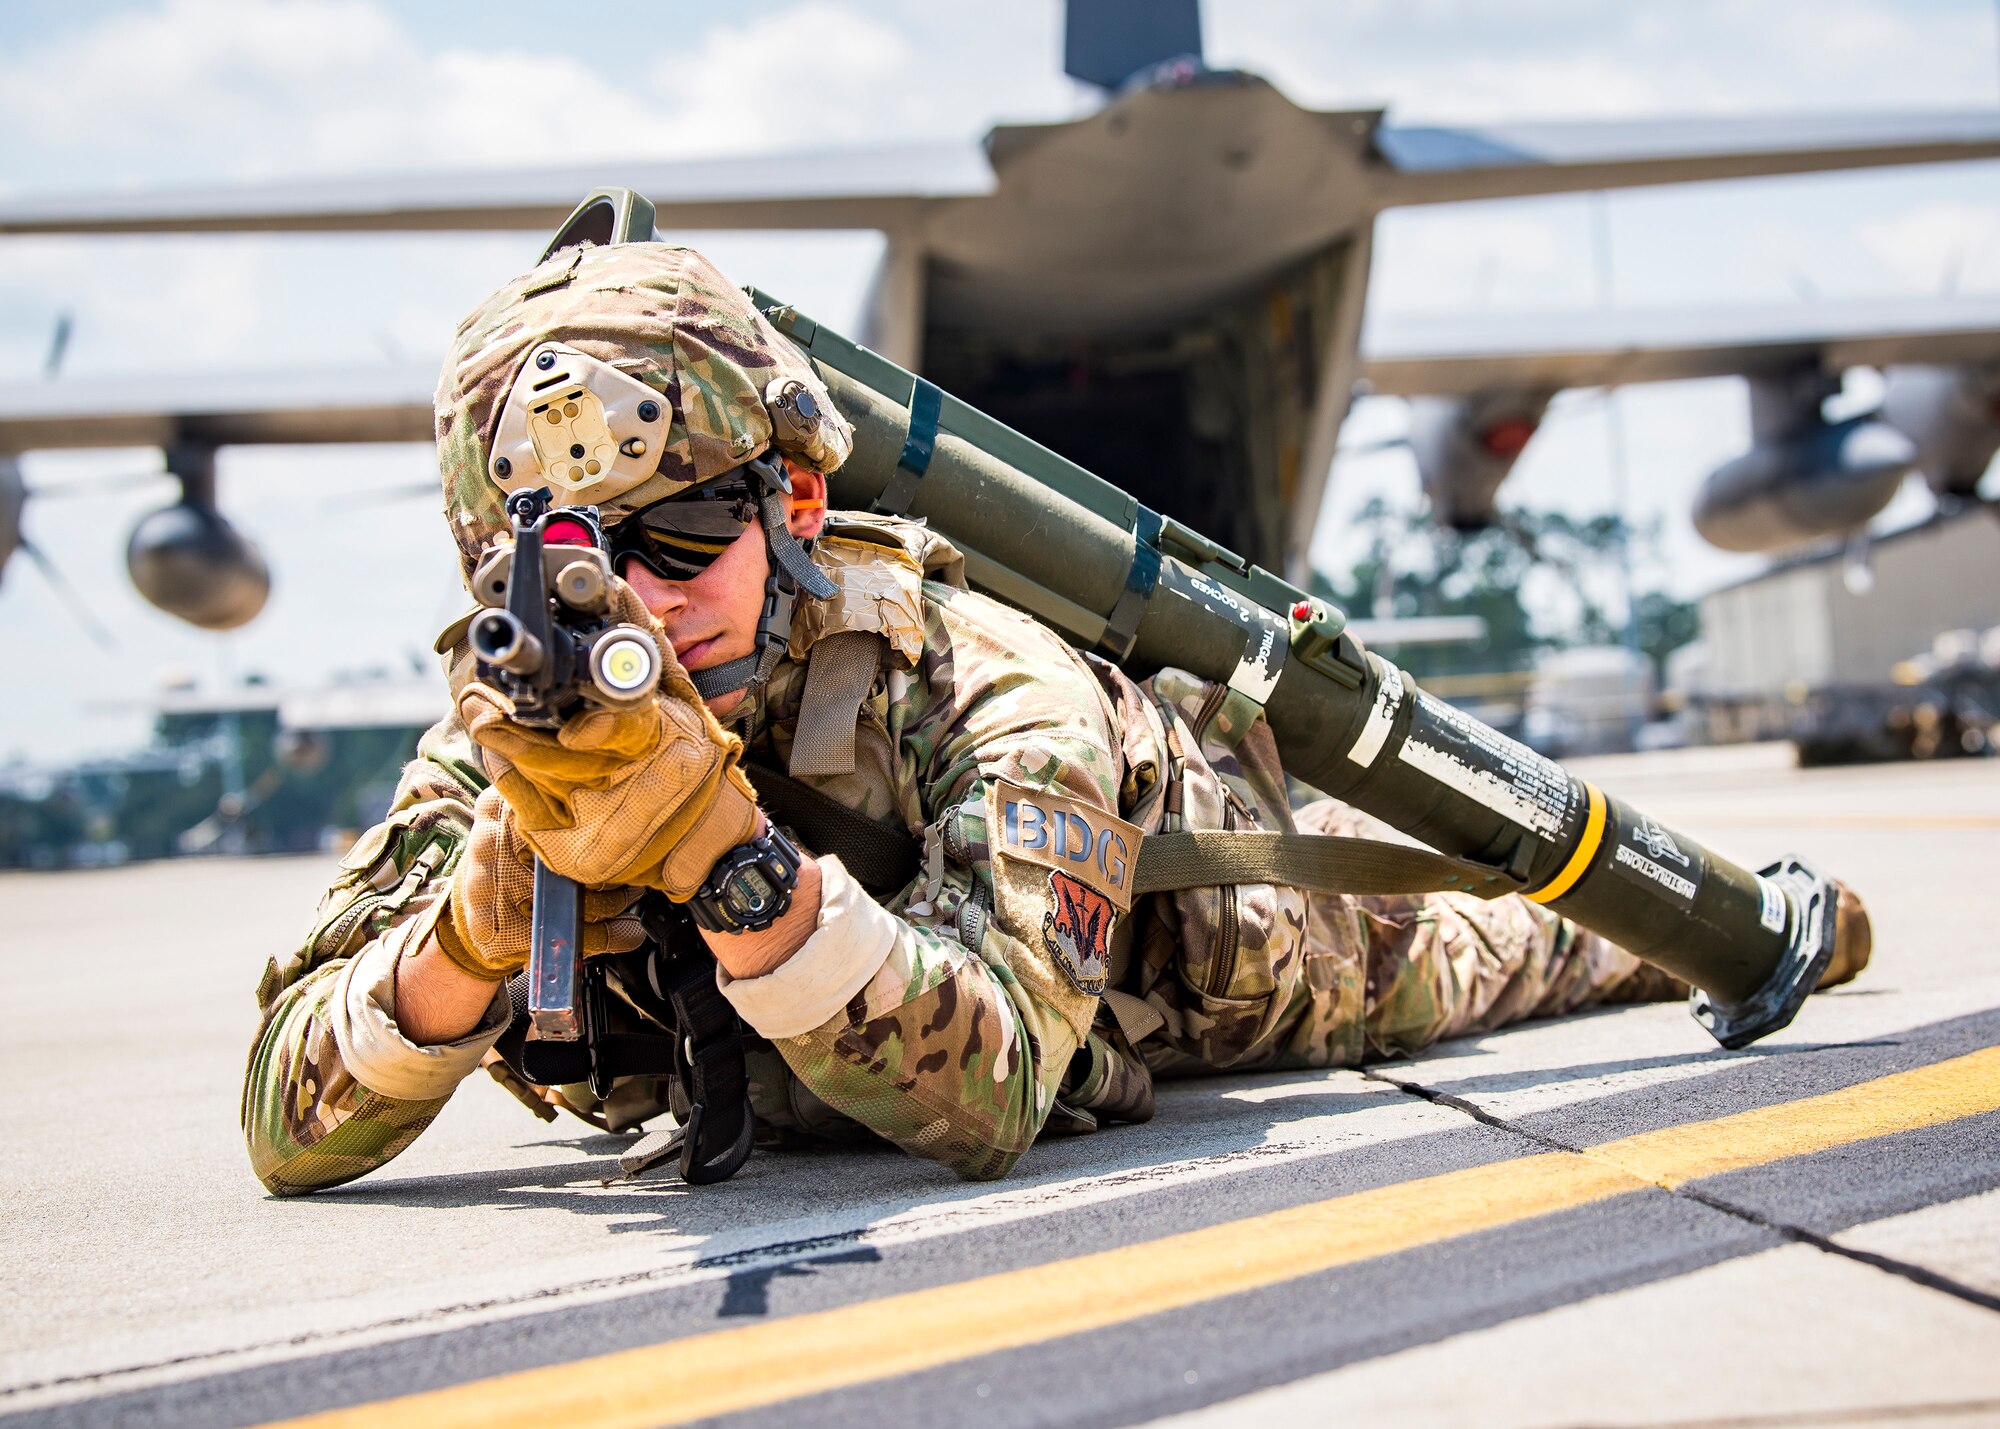 Airman Lucas Santos, 822d Base Defense Squadron fire team member, looks down the sight of an M4 Carbine during a tactical demonstration, Aug. 9, 2019, at Moody Air Force Base, Ga. Airmen from the 820th Base Defense Group did the tactical demo for Maj. Gen. Chad Franks, 9th Air Force commander. Franks has served on separate occasions as the commander for the 23d Wing and 347th Rescue Group and is a command pilot with more than 3,300 hours in multiple aircraft including HC-130J Combat King II and HH-60G Pave Hawk. (U.S. Air Force photo by Airman 1st Class Eugene Oliver)